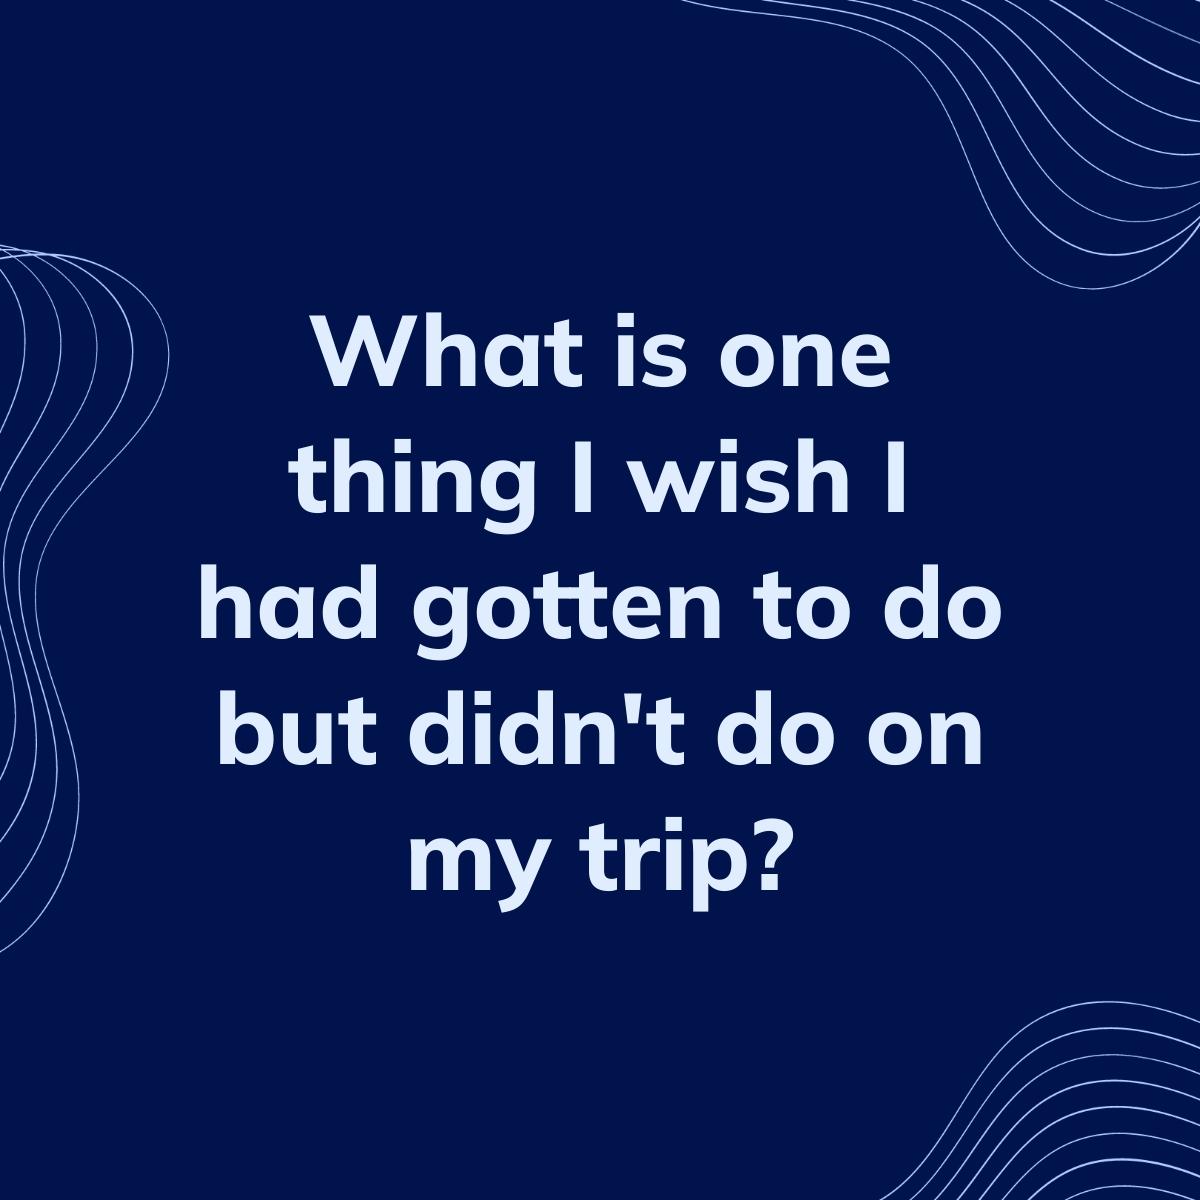 Journal Prompt: What is one thing I wish I had gotten to do but didn't do on my trip?